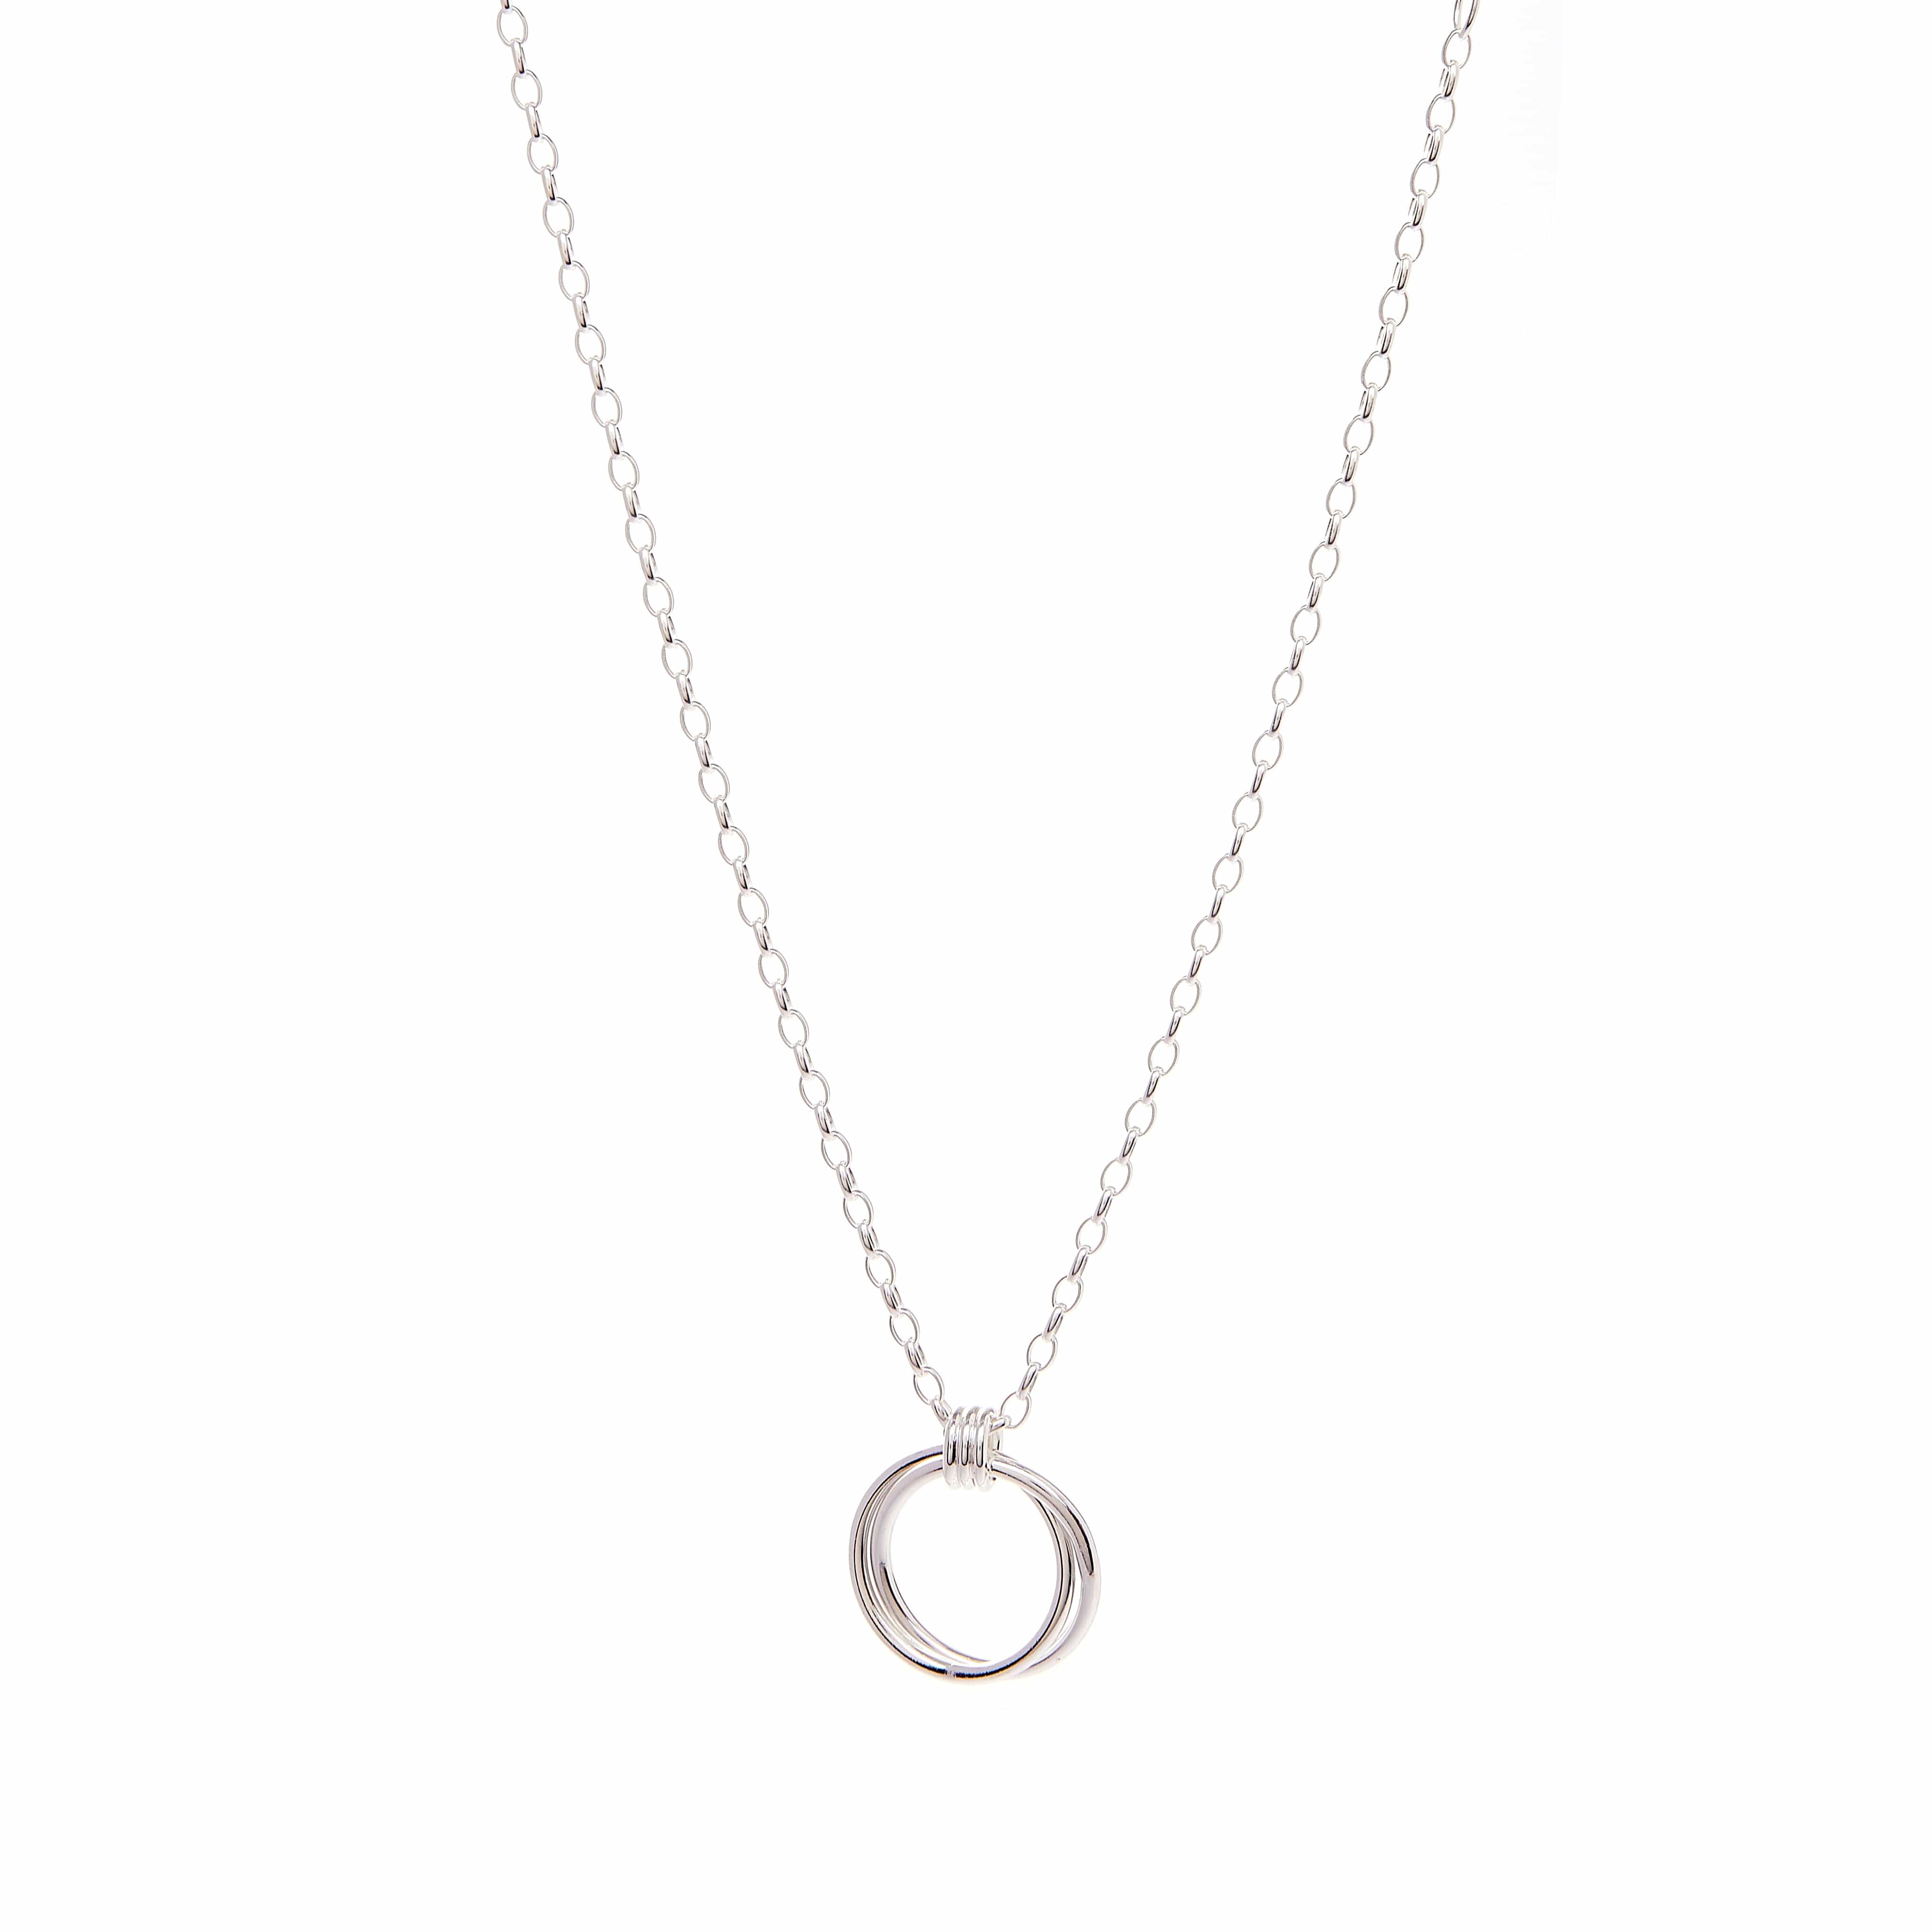 Amar Chain Necklace - Recycled Silver